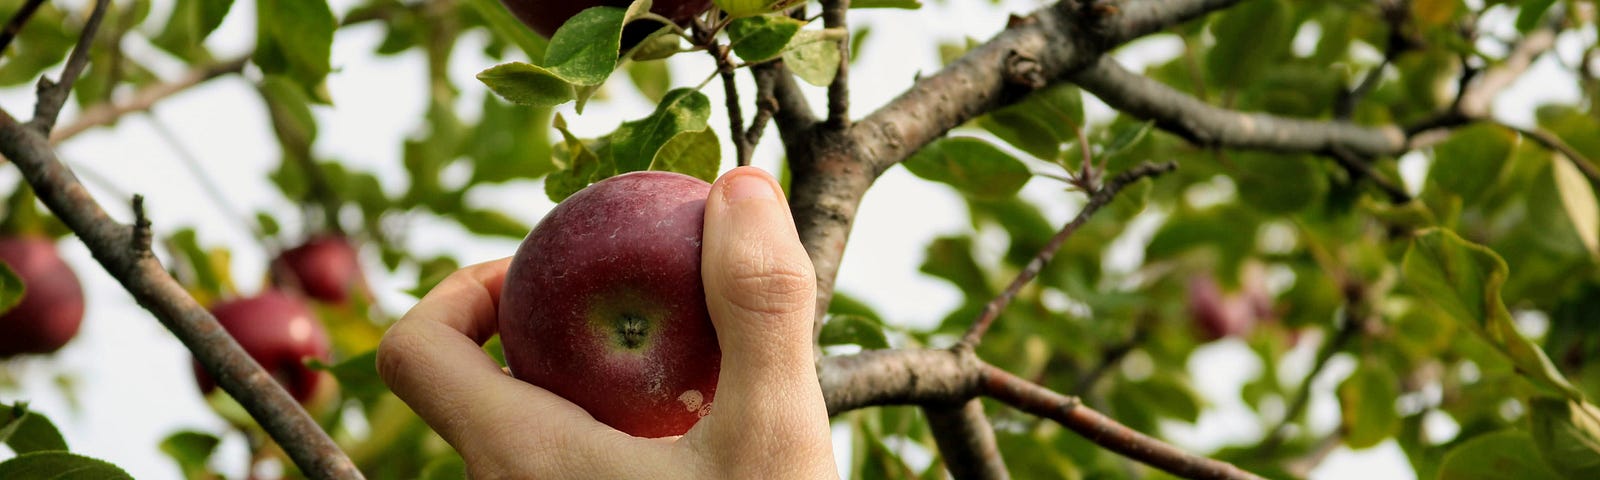 A hand is grabbing an apple from an apple tree.